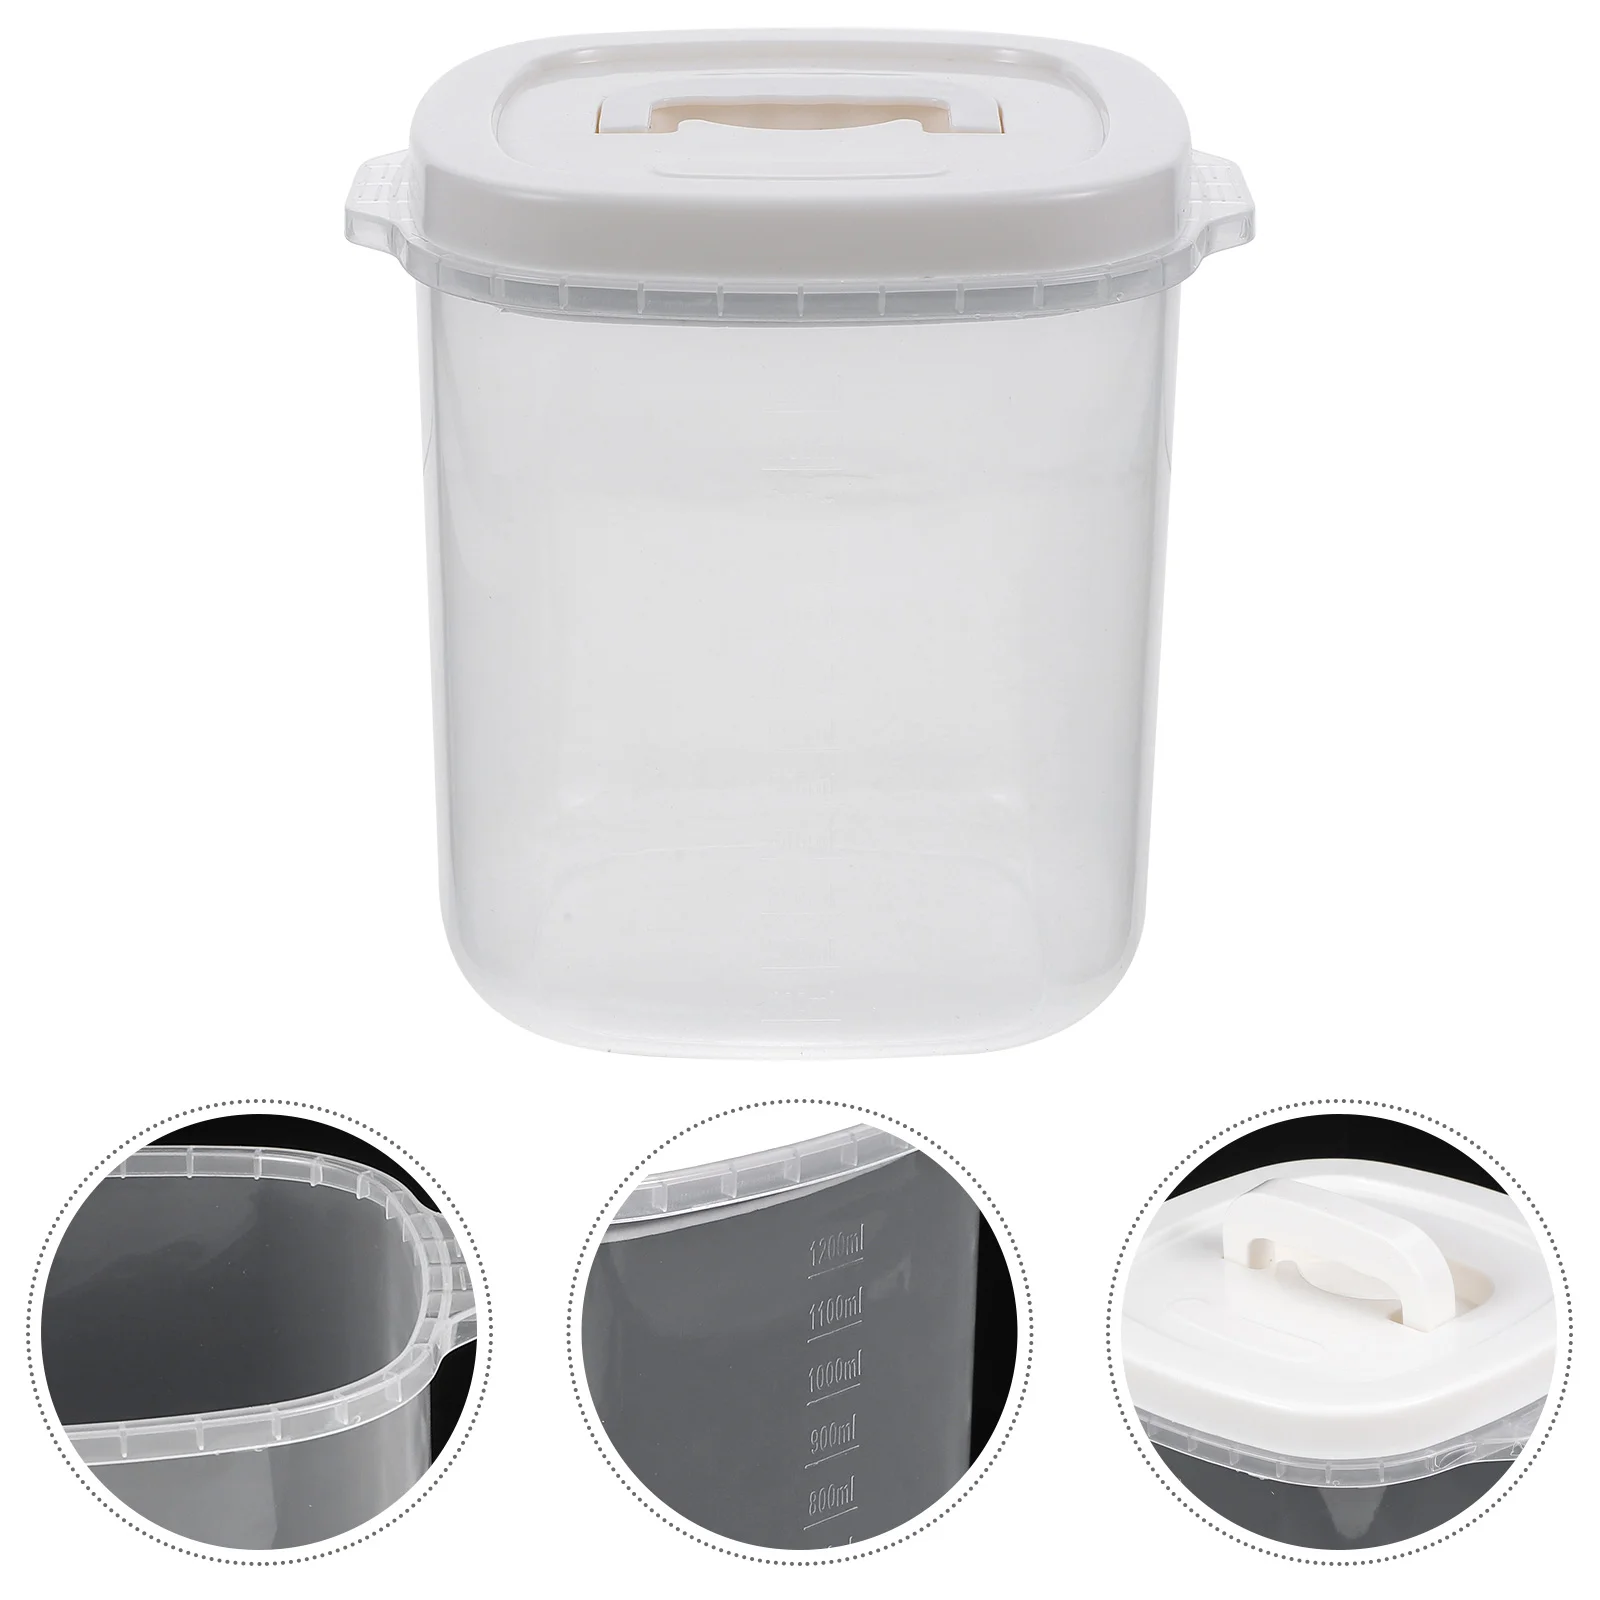 

Storage Jar Rice Container Sealed Kitchen Canisters Pantry Airtight Dispenser Oatmeal Box Grain Containers Dry Cereal Cans Bean